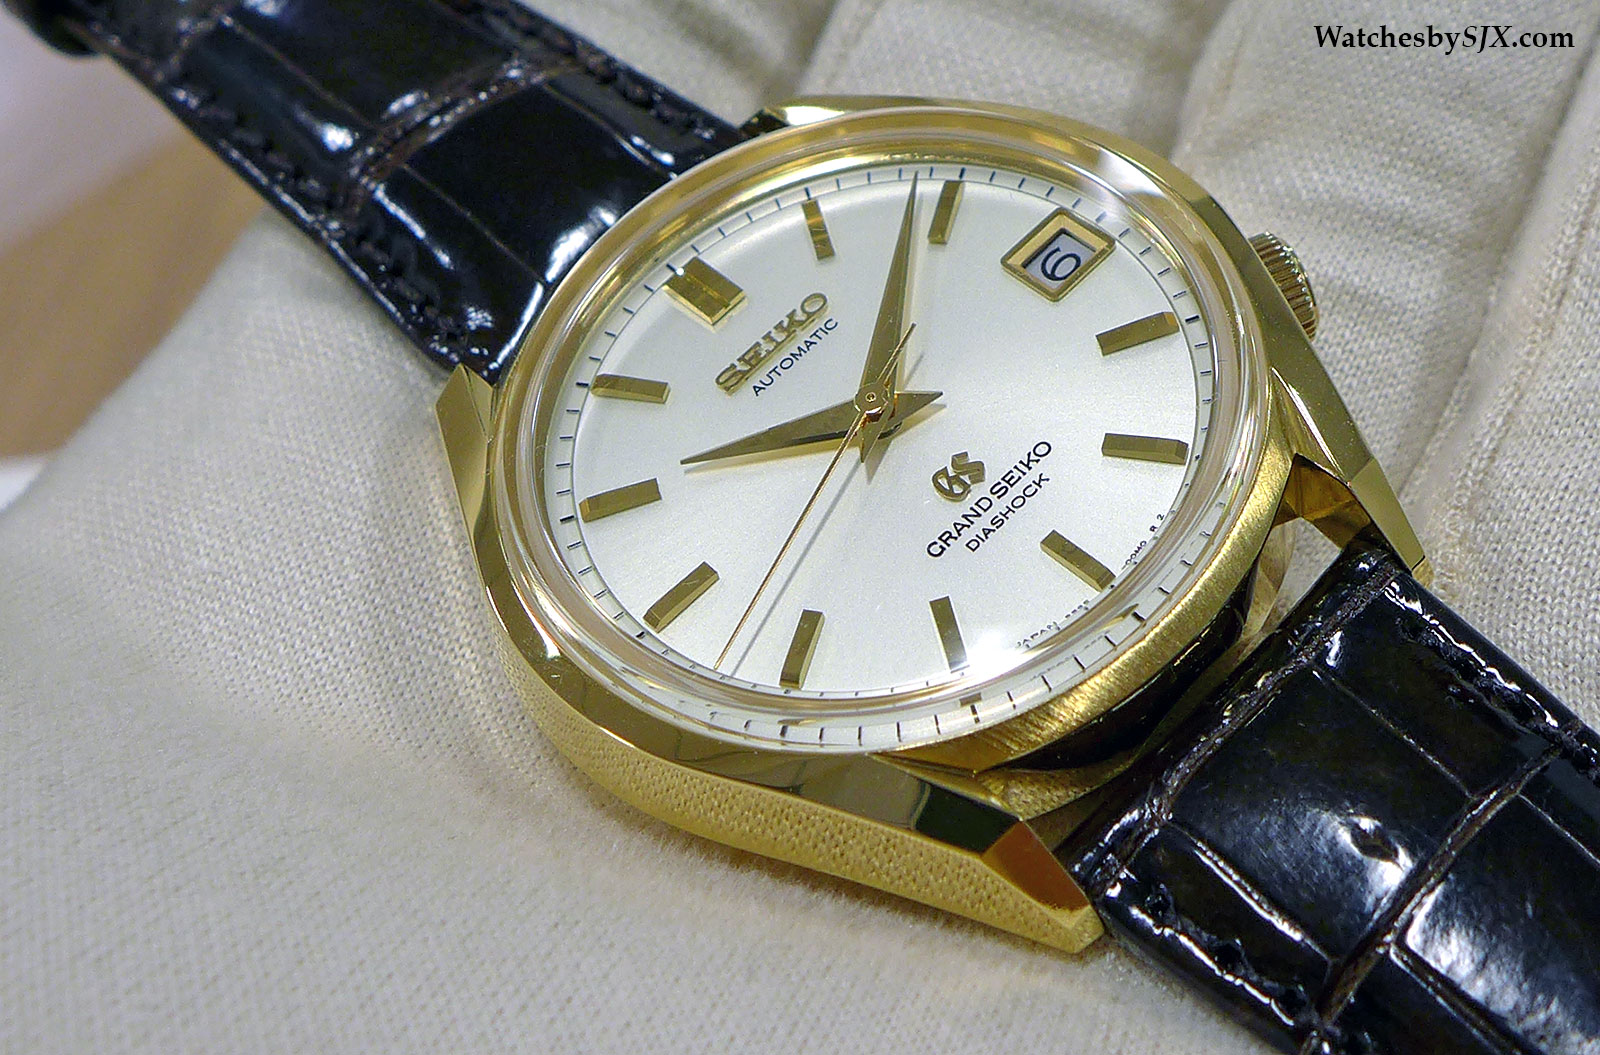 Hands-On With The Grand Seiko Historical Collection 62GS Reissue (With  Original Photos And Price) | SJX Watches